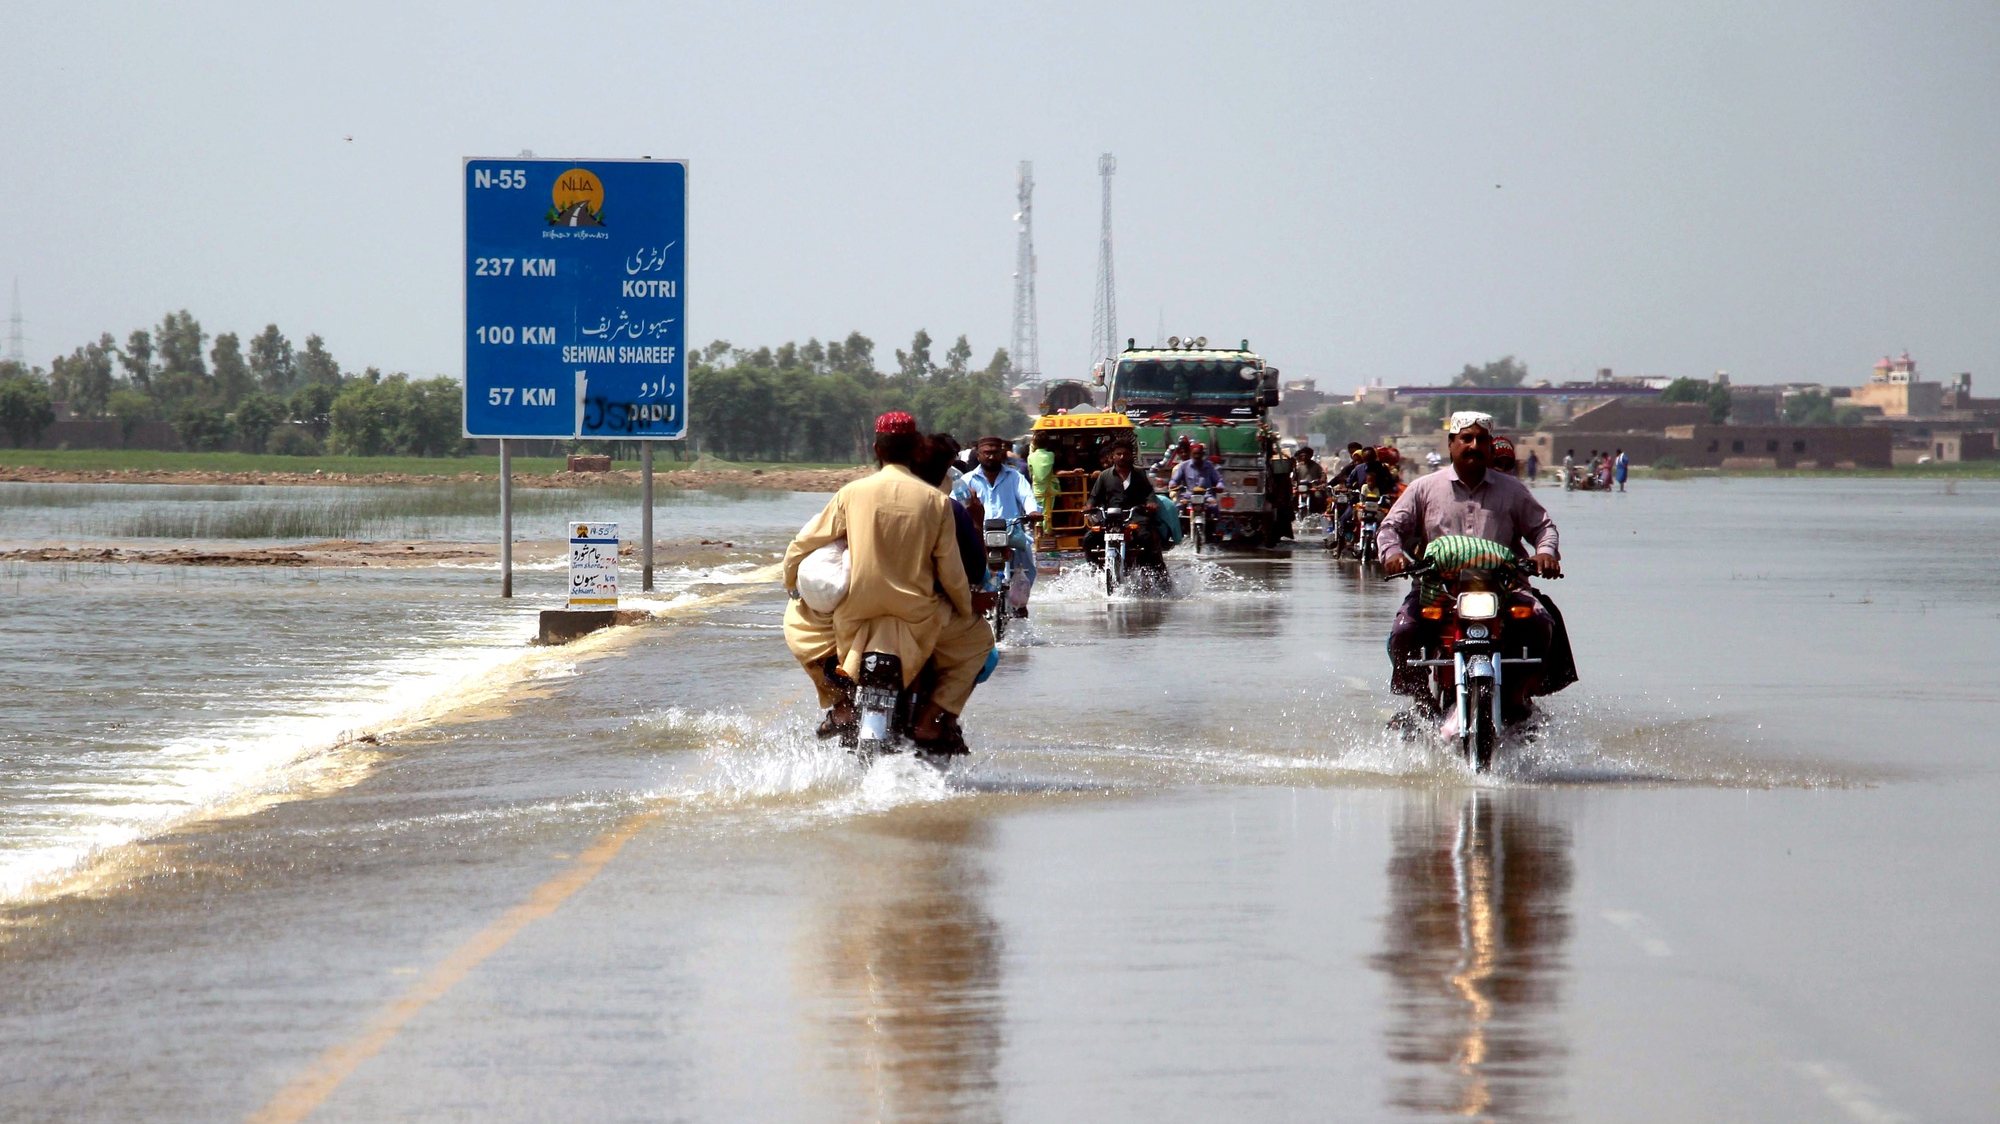 epa10147386 People cross a flooded highway in Dadu district, Sindh province, Pakistan, 30 August 2022. According to the National Disaster Management Authority (NDMA) on 27 August, flash floods triggered by heavy monsoon rains have killed over 1,000 people across Pakistan since mid-June 2022. More than 33 million people have been affected by floods, the country&#039;s climate change minister said.  EPA/WAQAR HUSSEIN